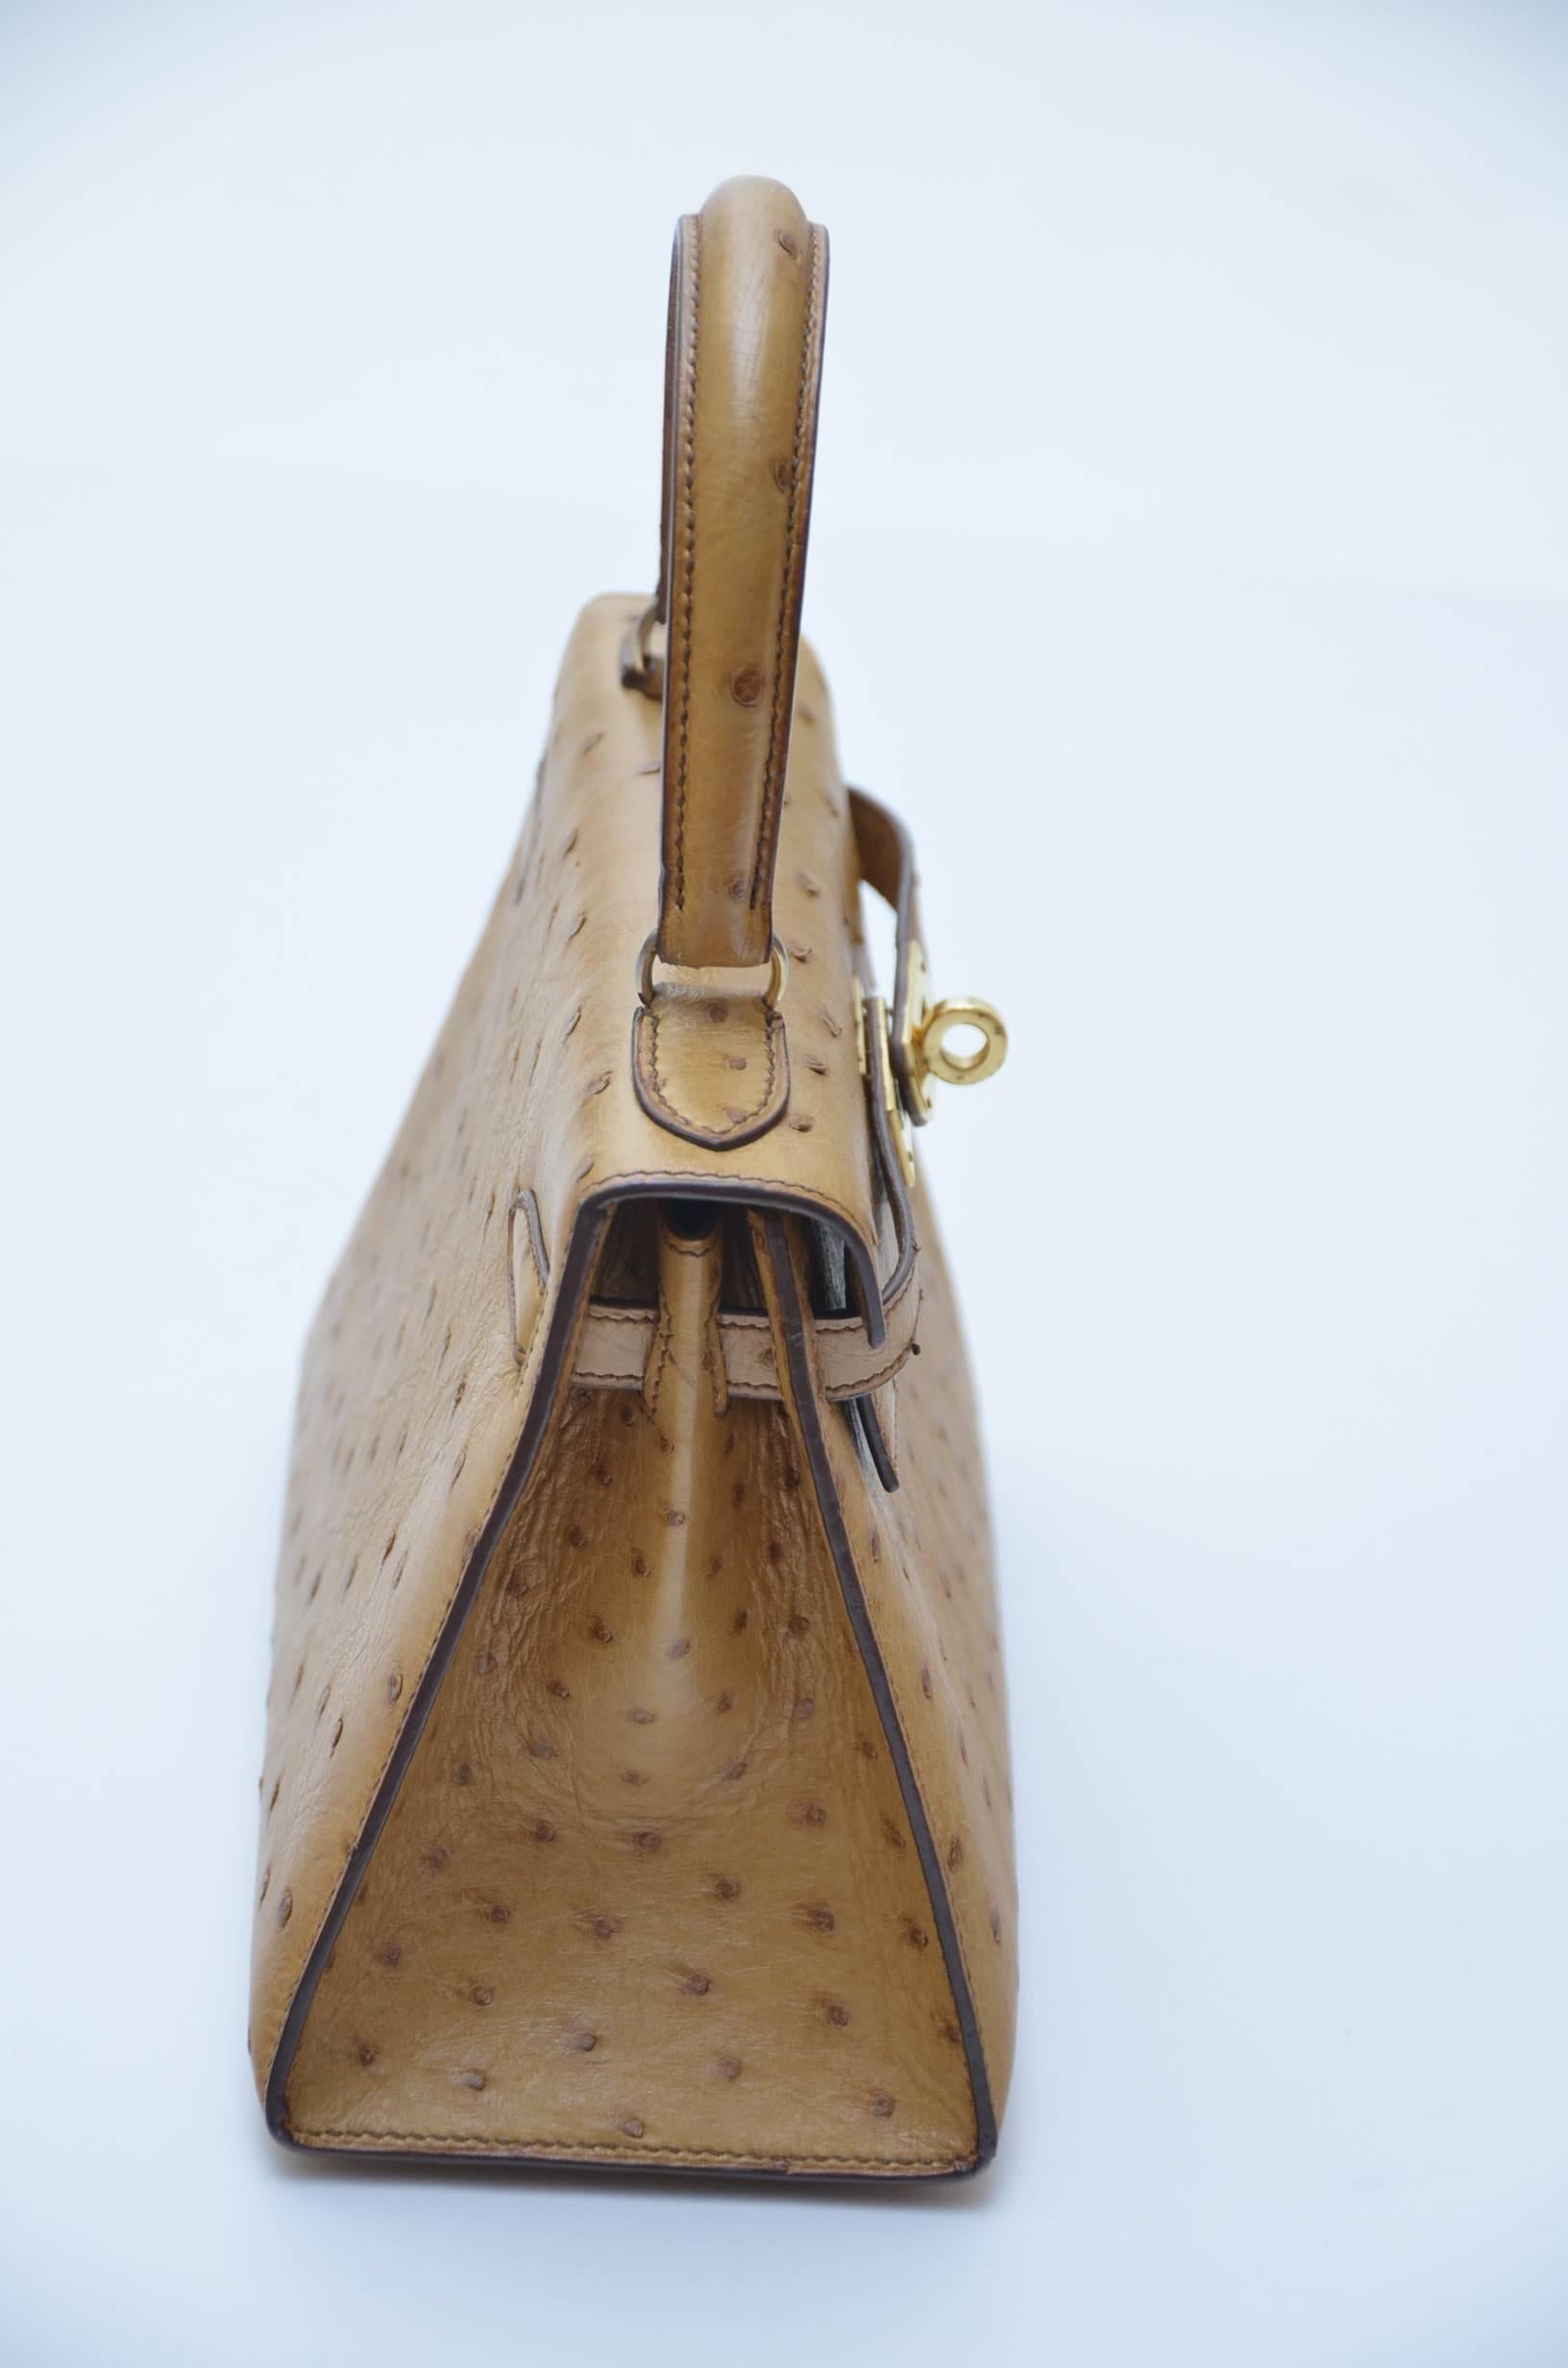 Hermes vintage mini 20 Cm Kelly .Gold natural color ostrich leather.
Beautiful and rare handbag.
Mint vintage condition.
Approx. measures:length: 20cm / 7.75